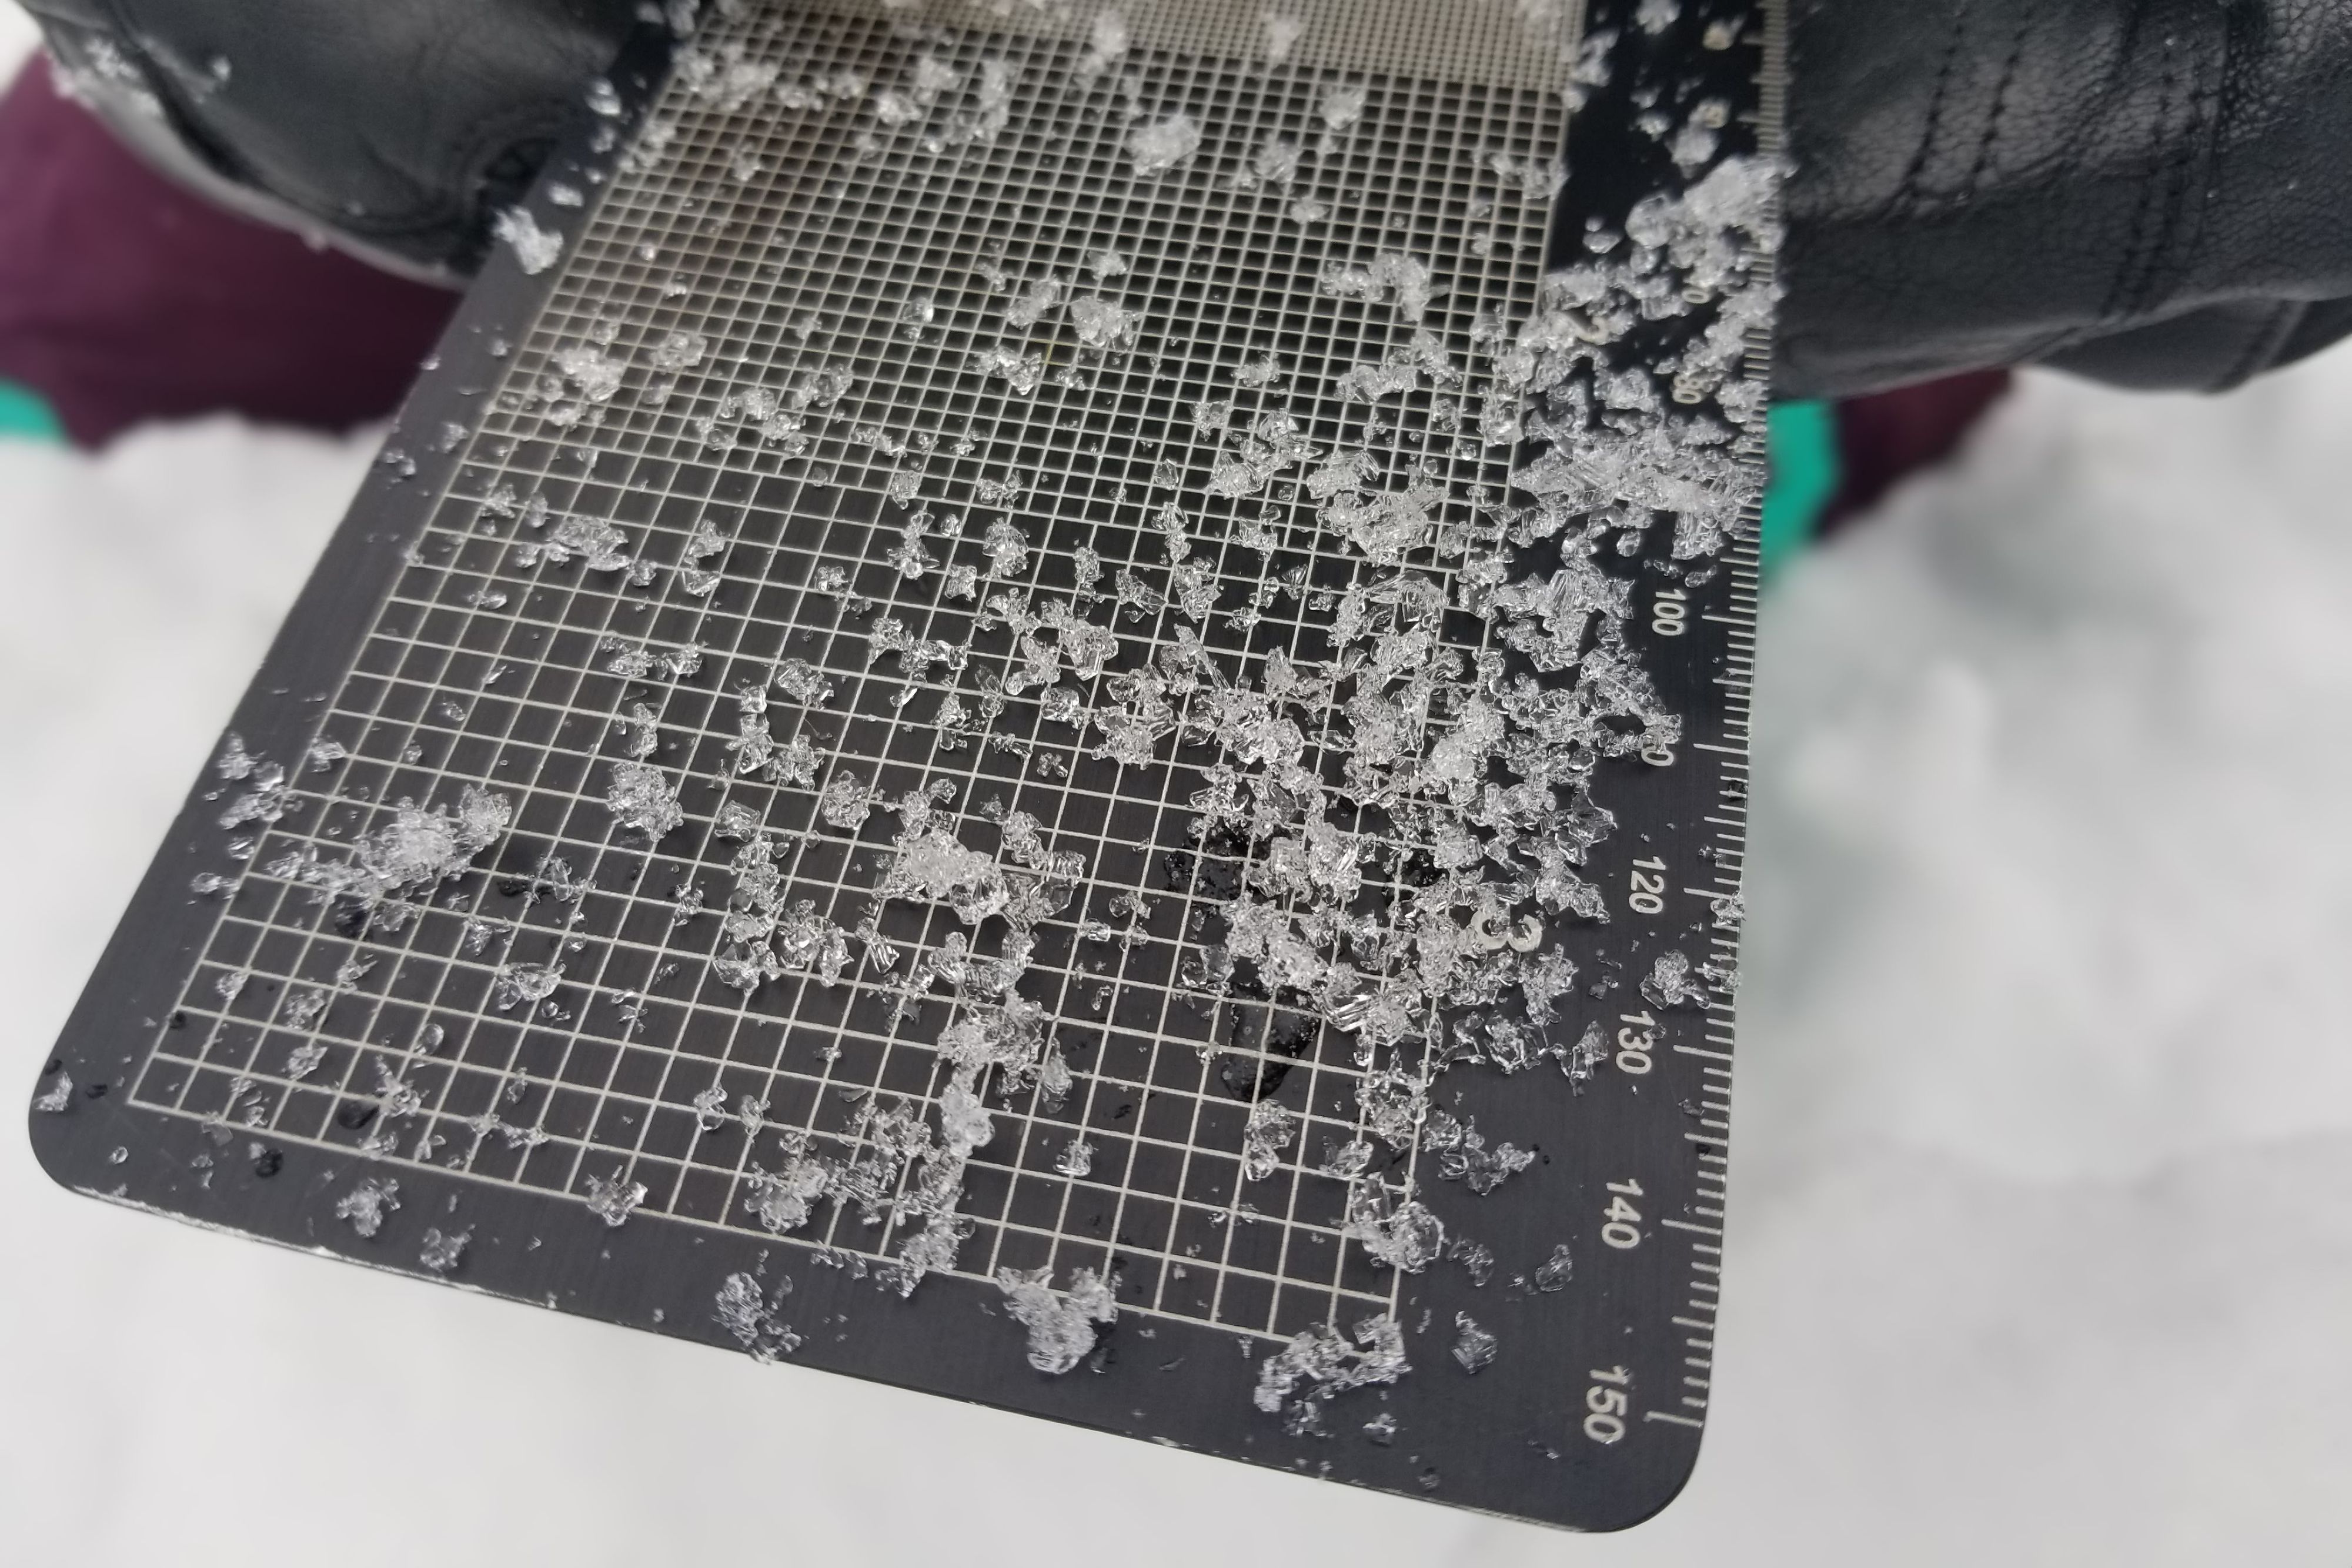 These crystals form in response to differences in temperature throughout the snowpack. They are sharp-sided grains that don’t bond well with each other or with surrounding snow. A layer of facets looks and feels like sugar, with virtually no cohesion between the grains.